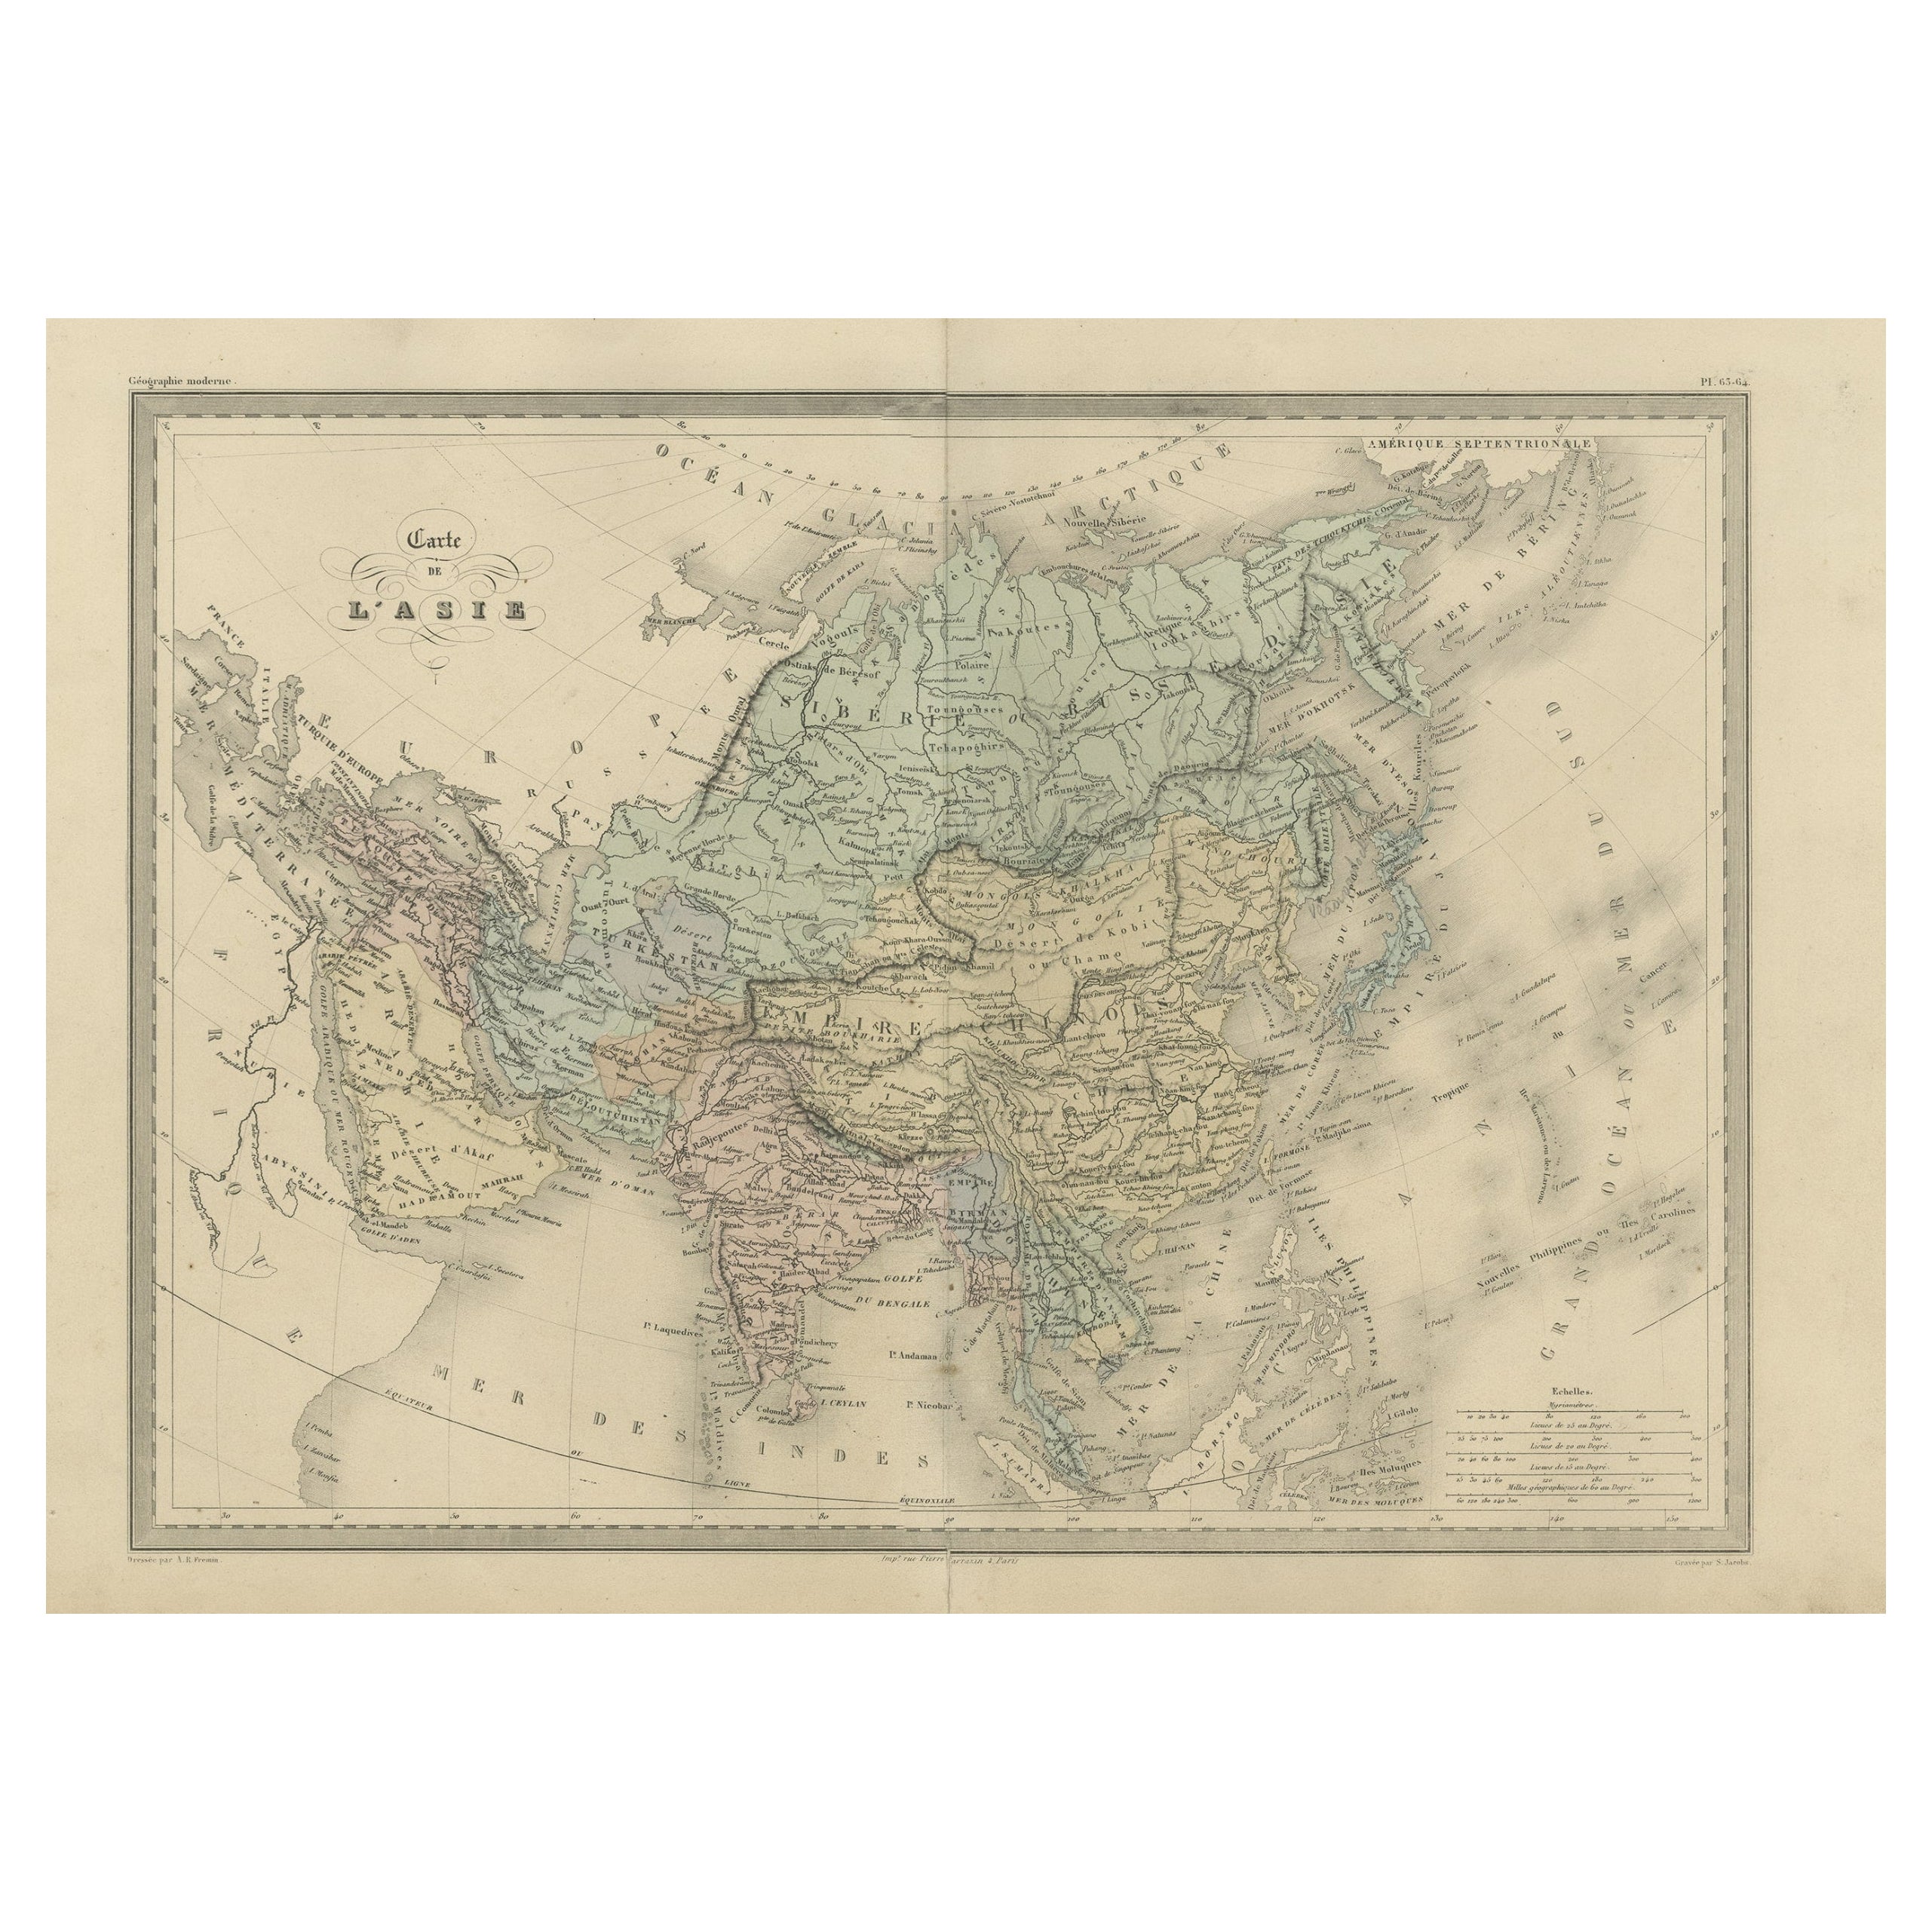 Antique Map of Asia by Malte-Brun, 1880